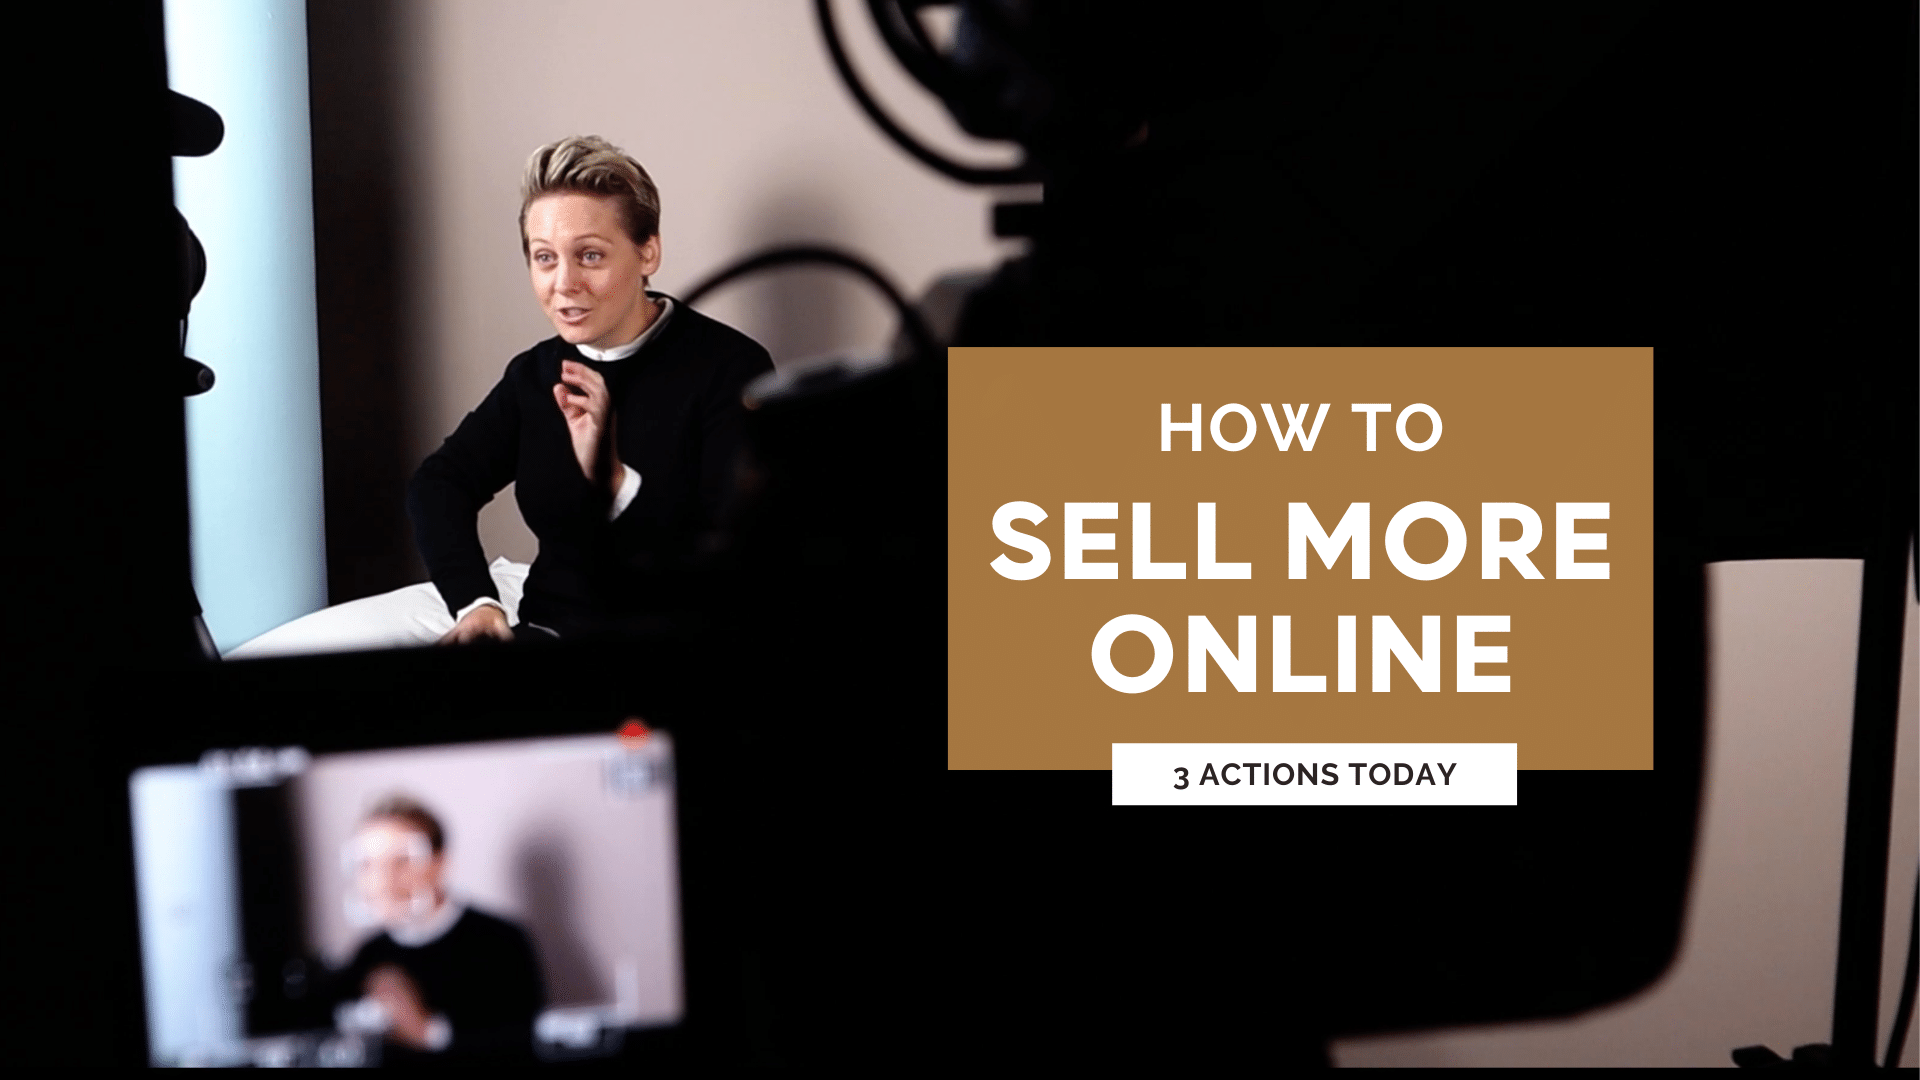 How to sell more online